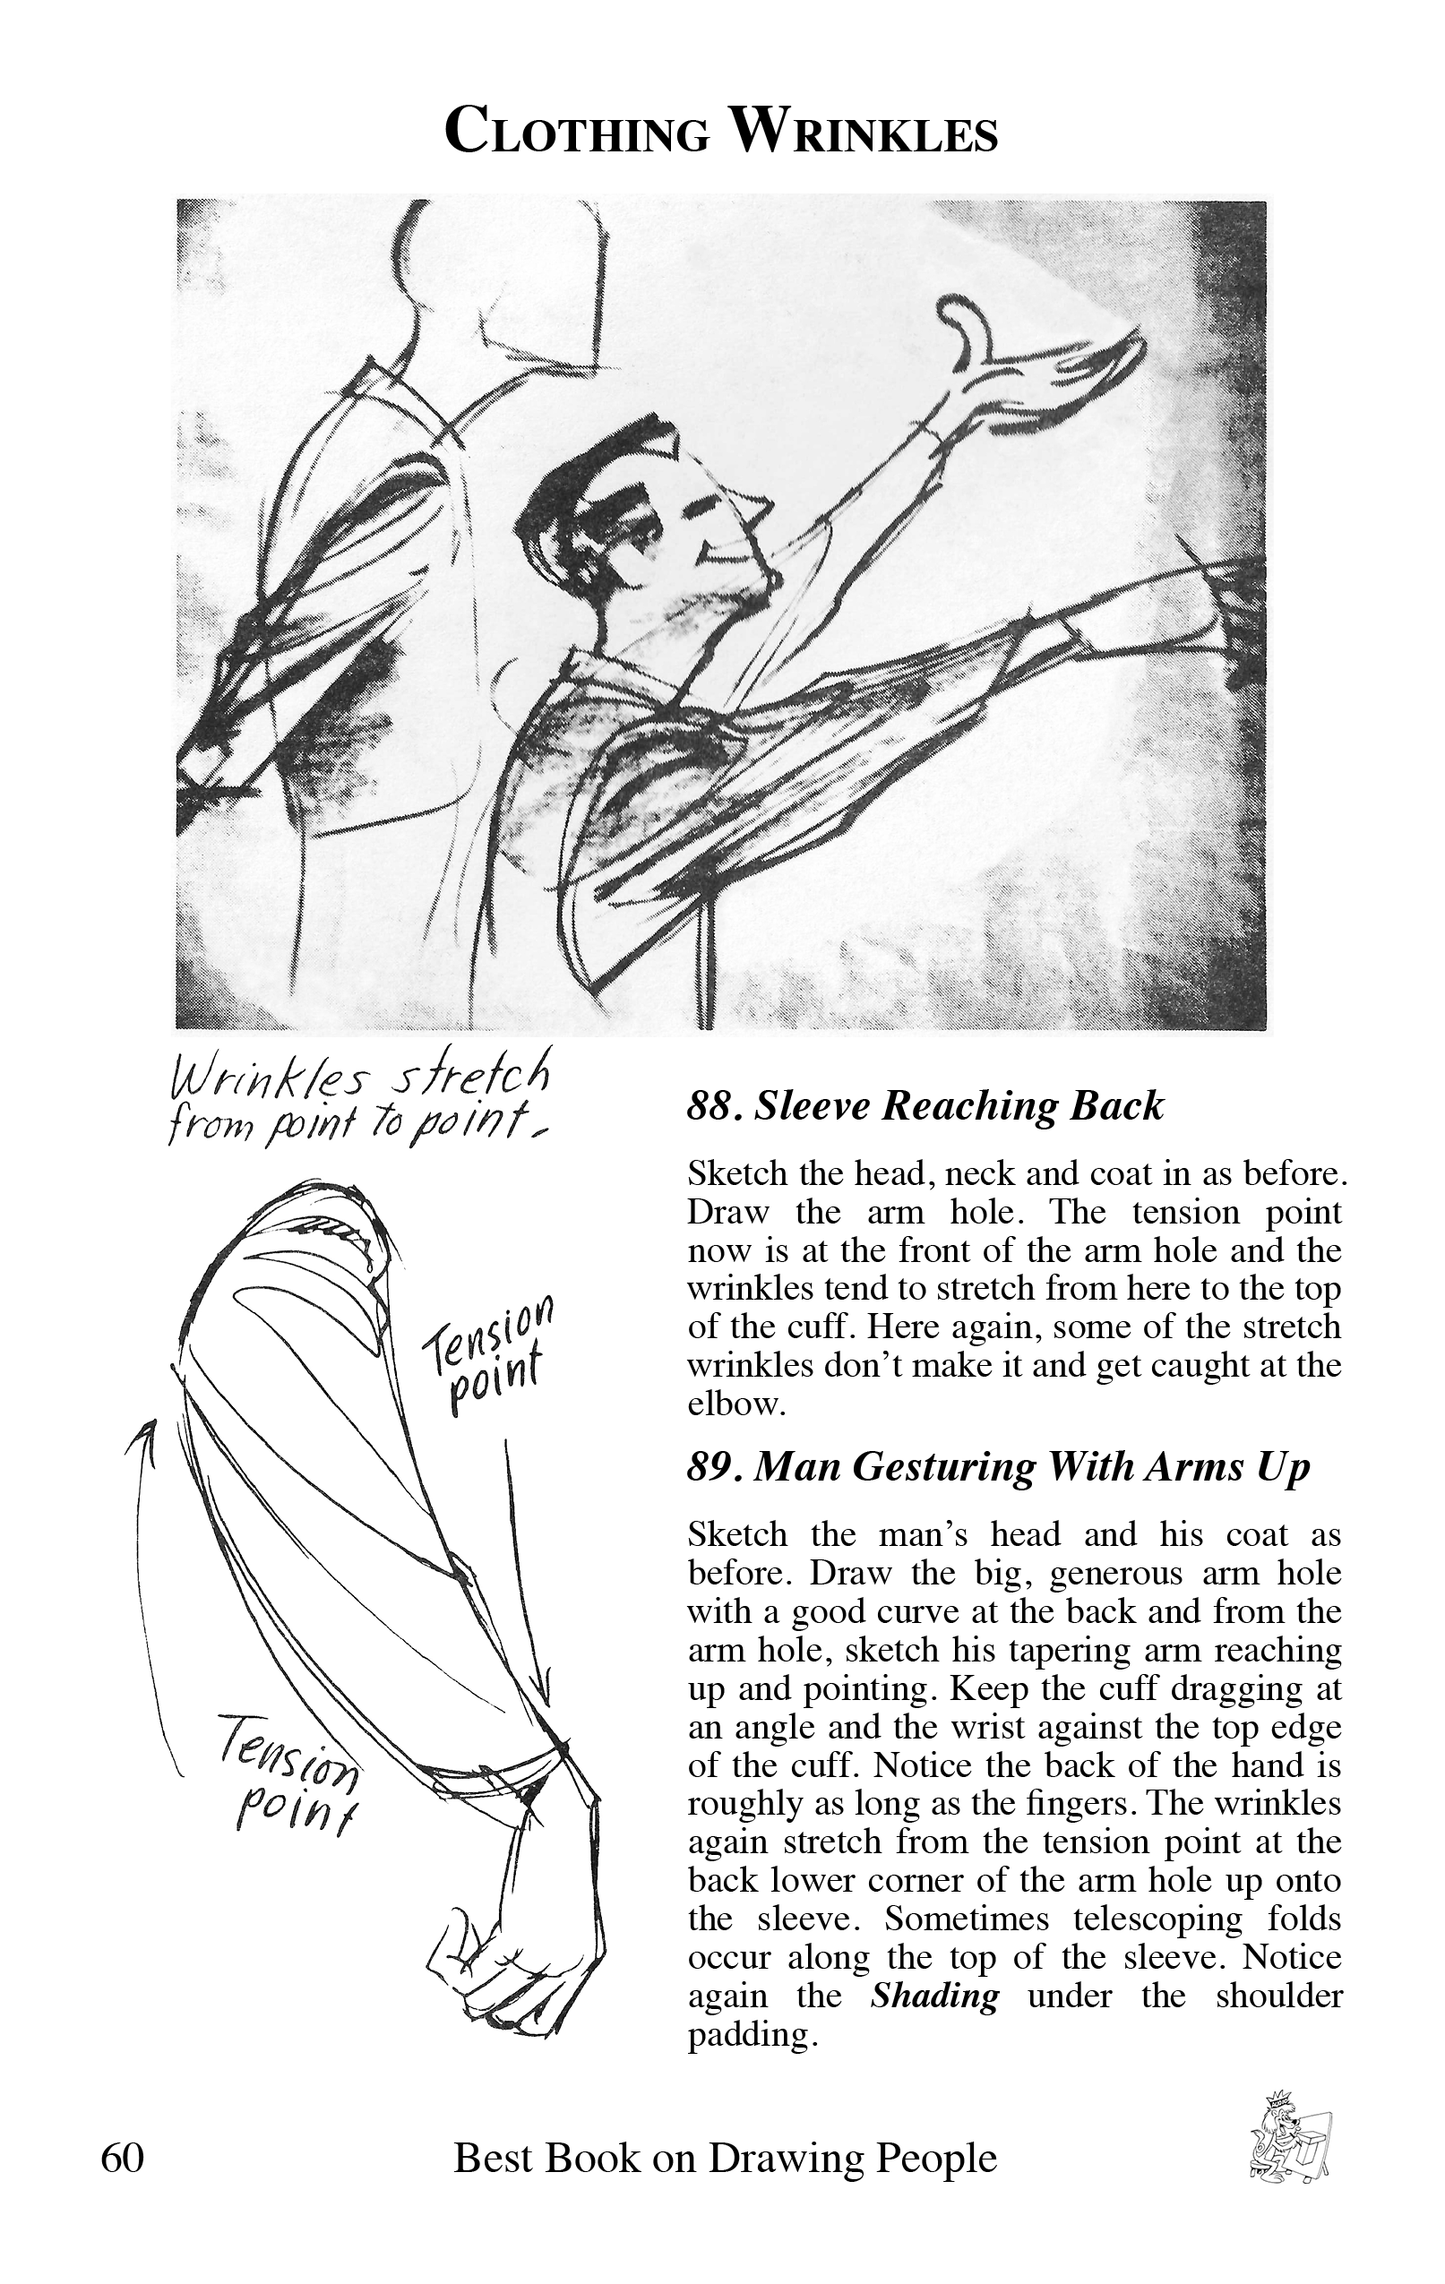 Clothing Wrinkles sample page from the book Best Book on Drawing People by Bruce McIntyre